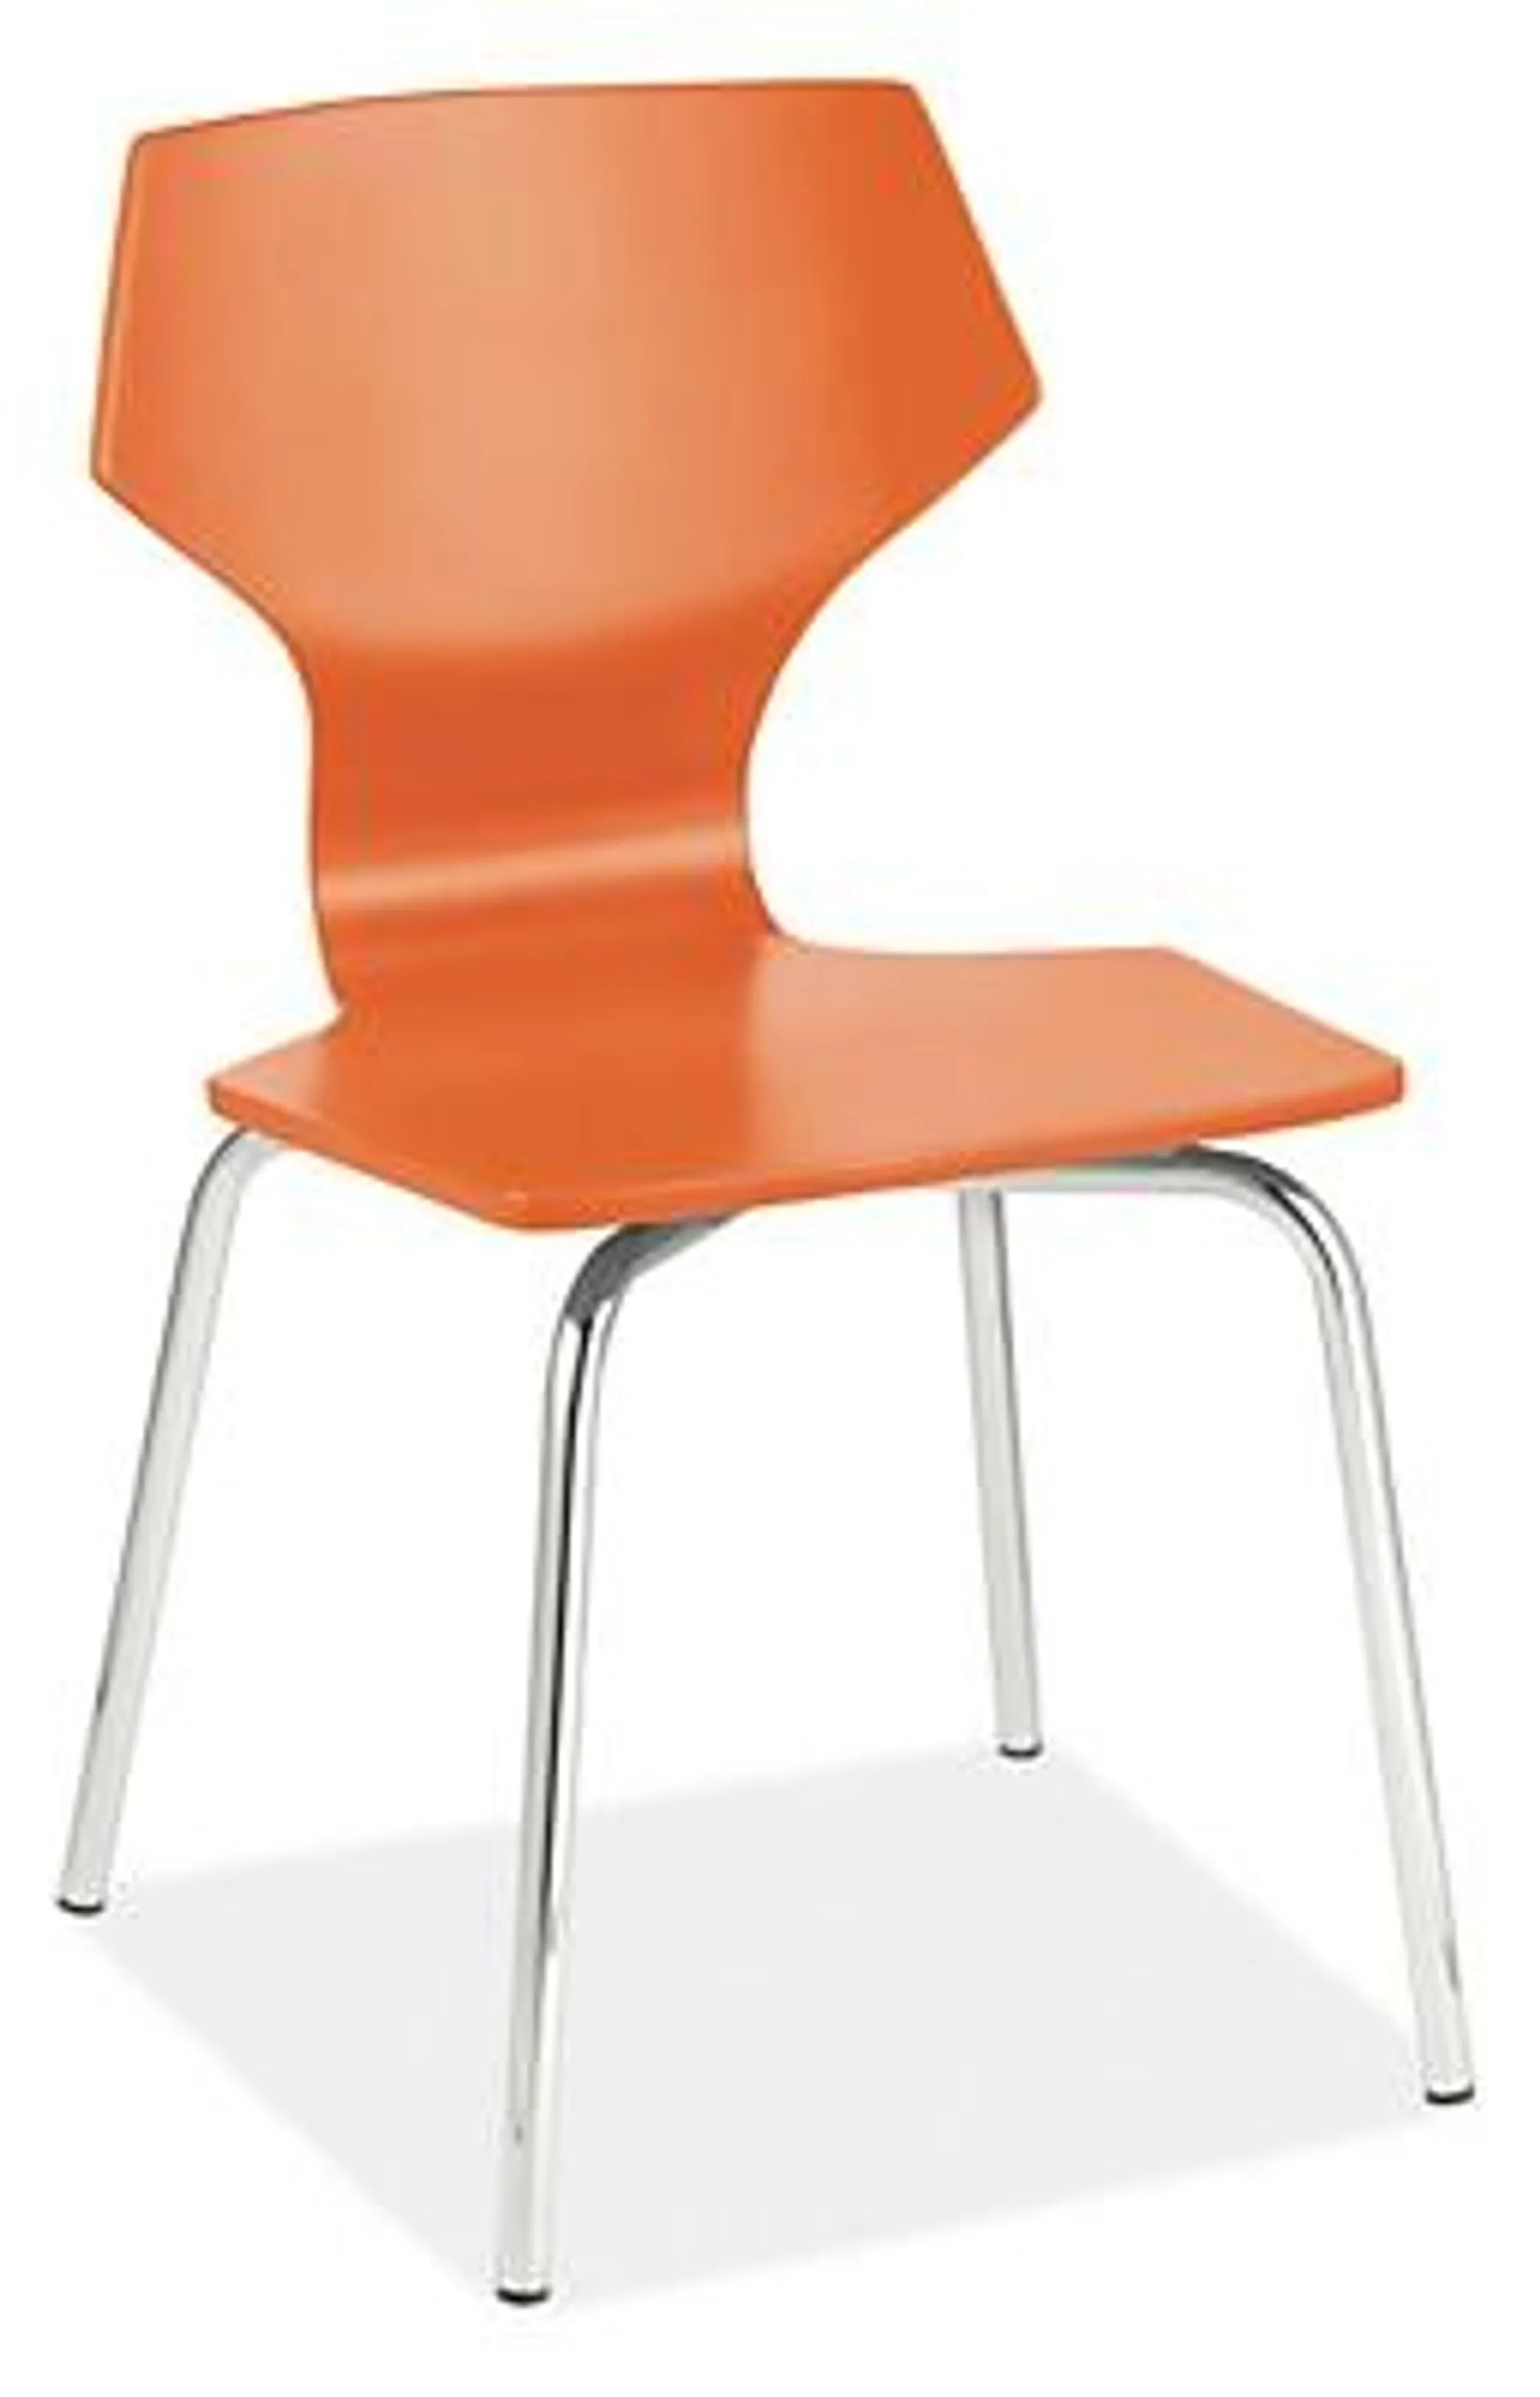 Perch Chair in Orange with Chrome Base